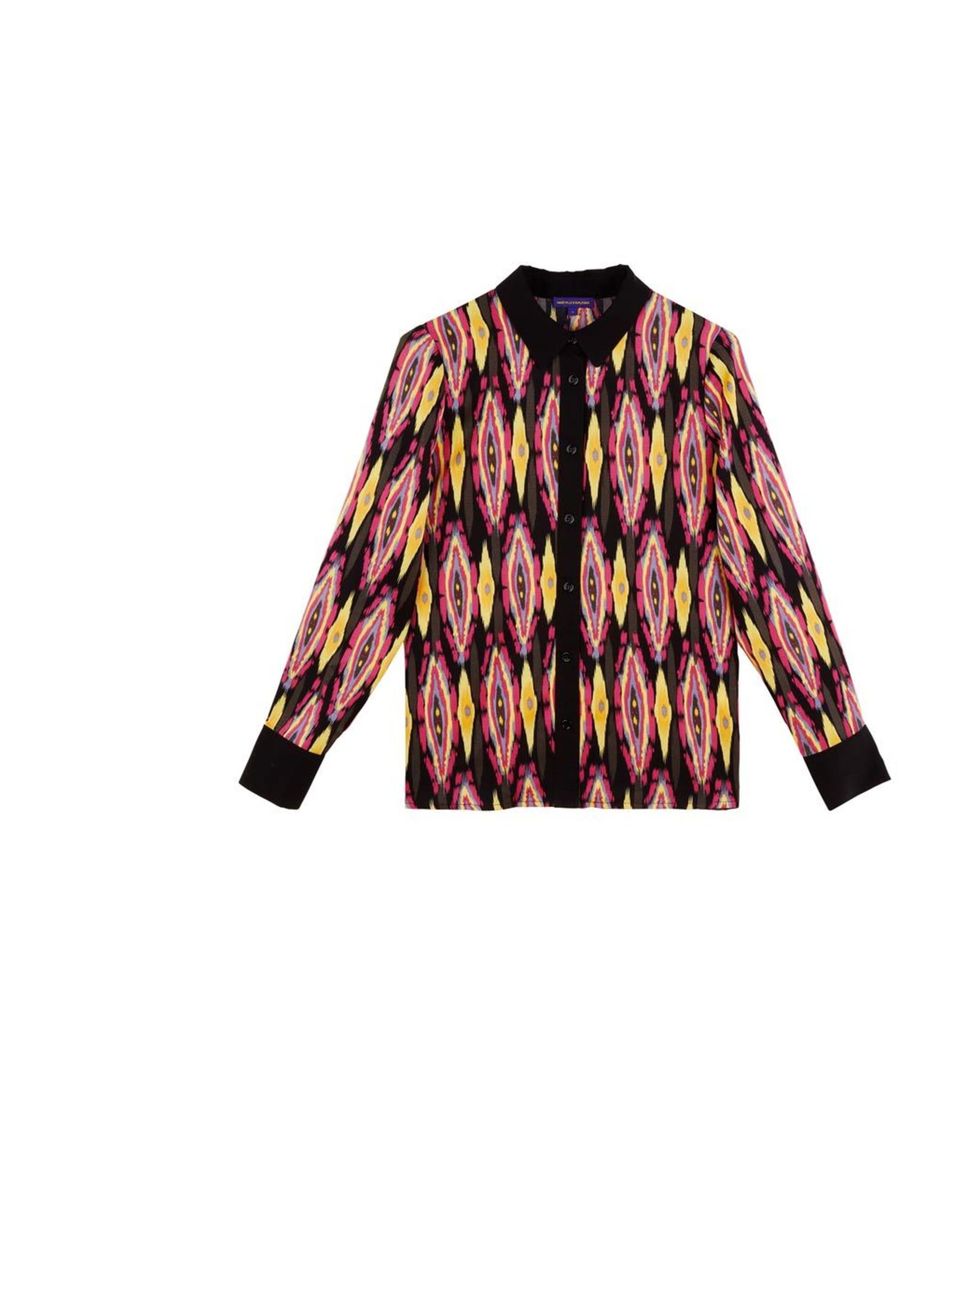 <p>Vaudeville &amp; Burlesque printed shirt, £65, at Urban Outfitters, for stockists call 0203 219 1944</p>